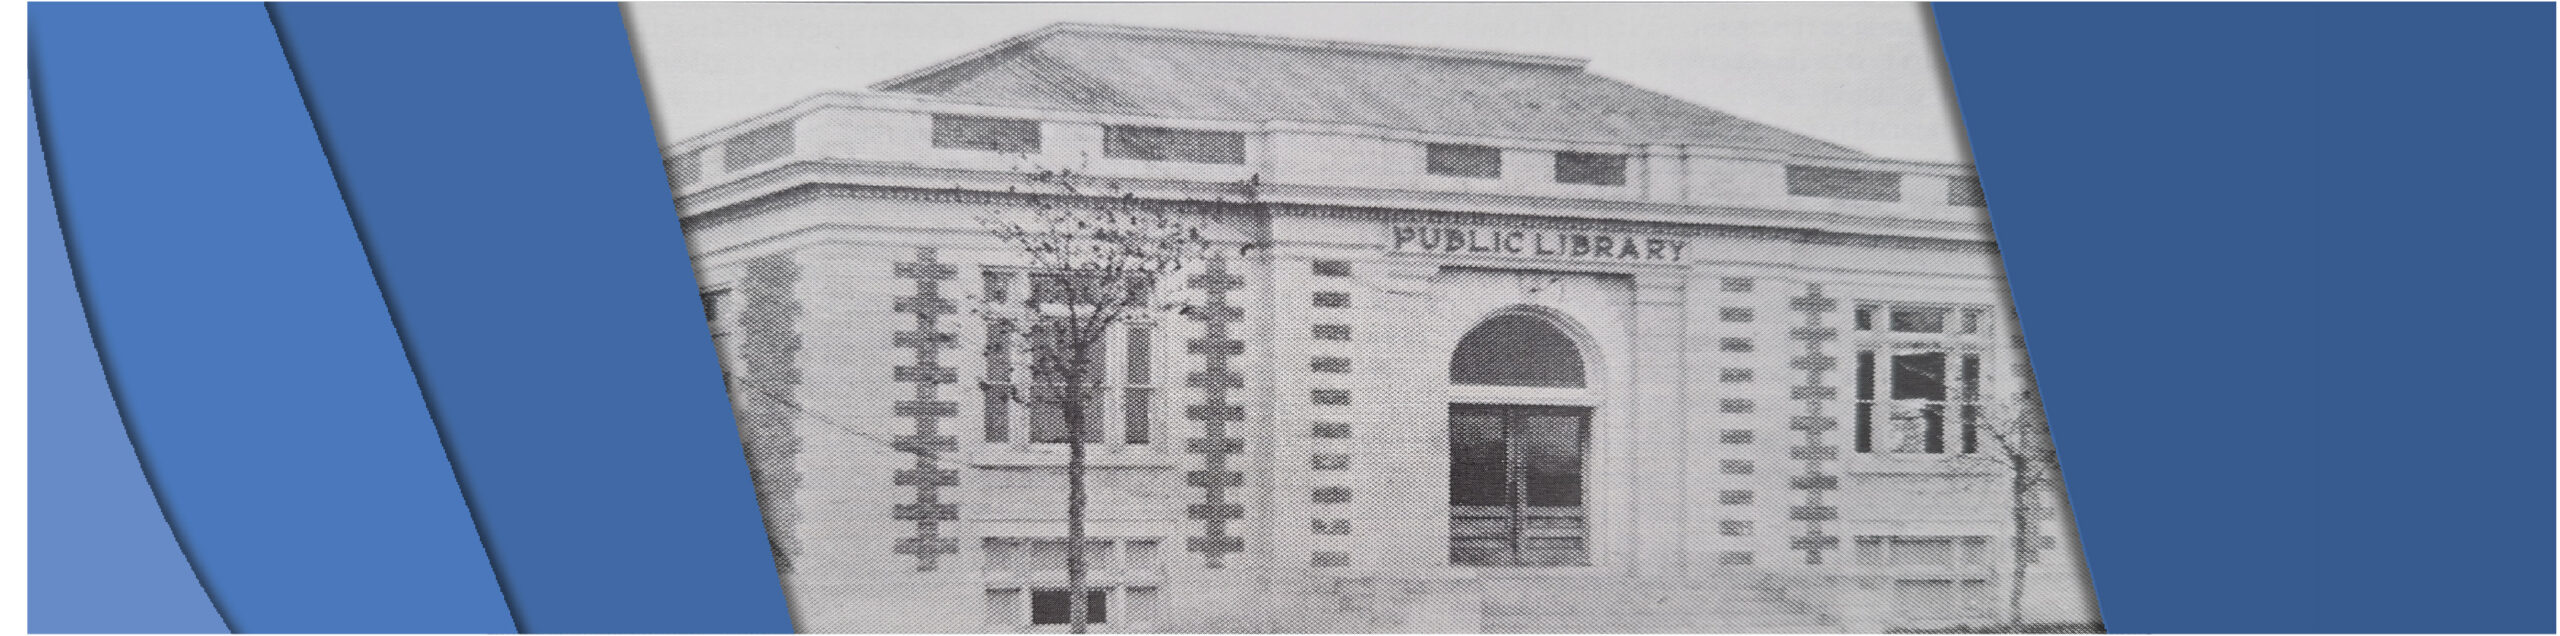 Picture of the front entrance to the original Selkirk Public Library. Large arched entrance with two large windows on either side.